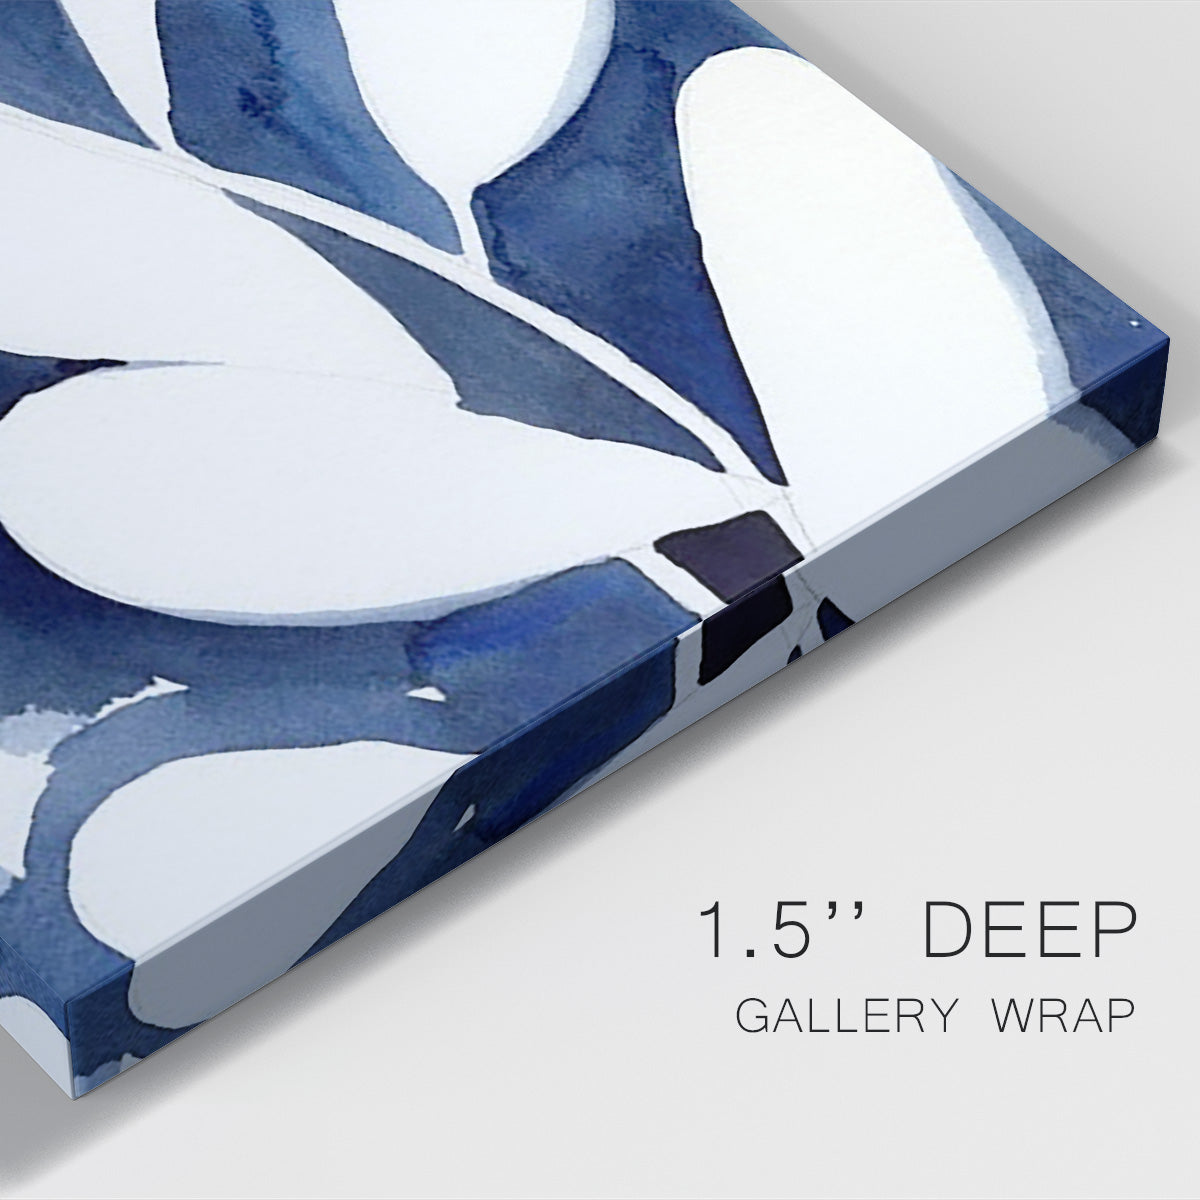 Blue Eucalyptus II Premium Gallery Wrapped Canvas - Ready to Hang